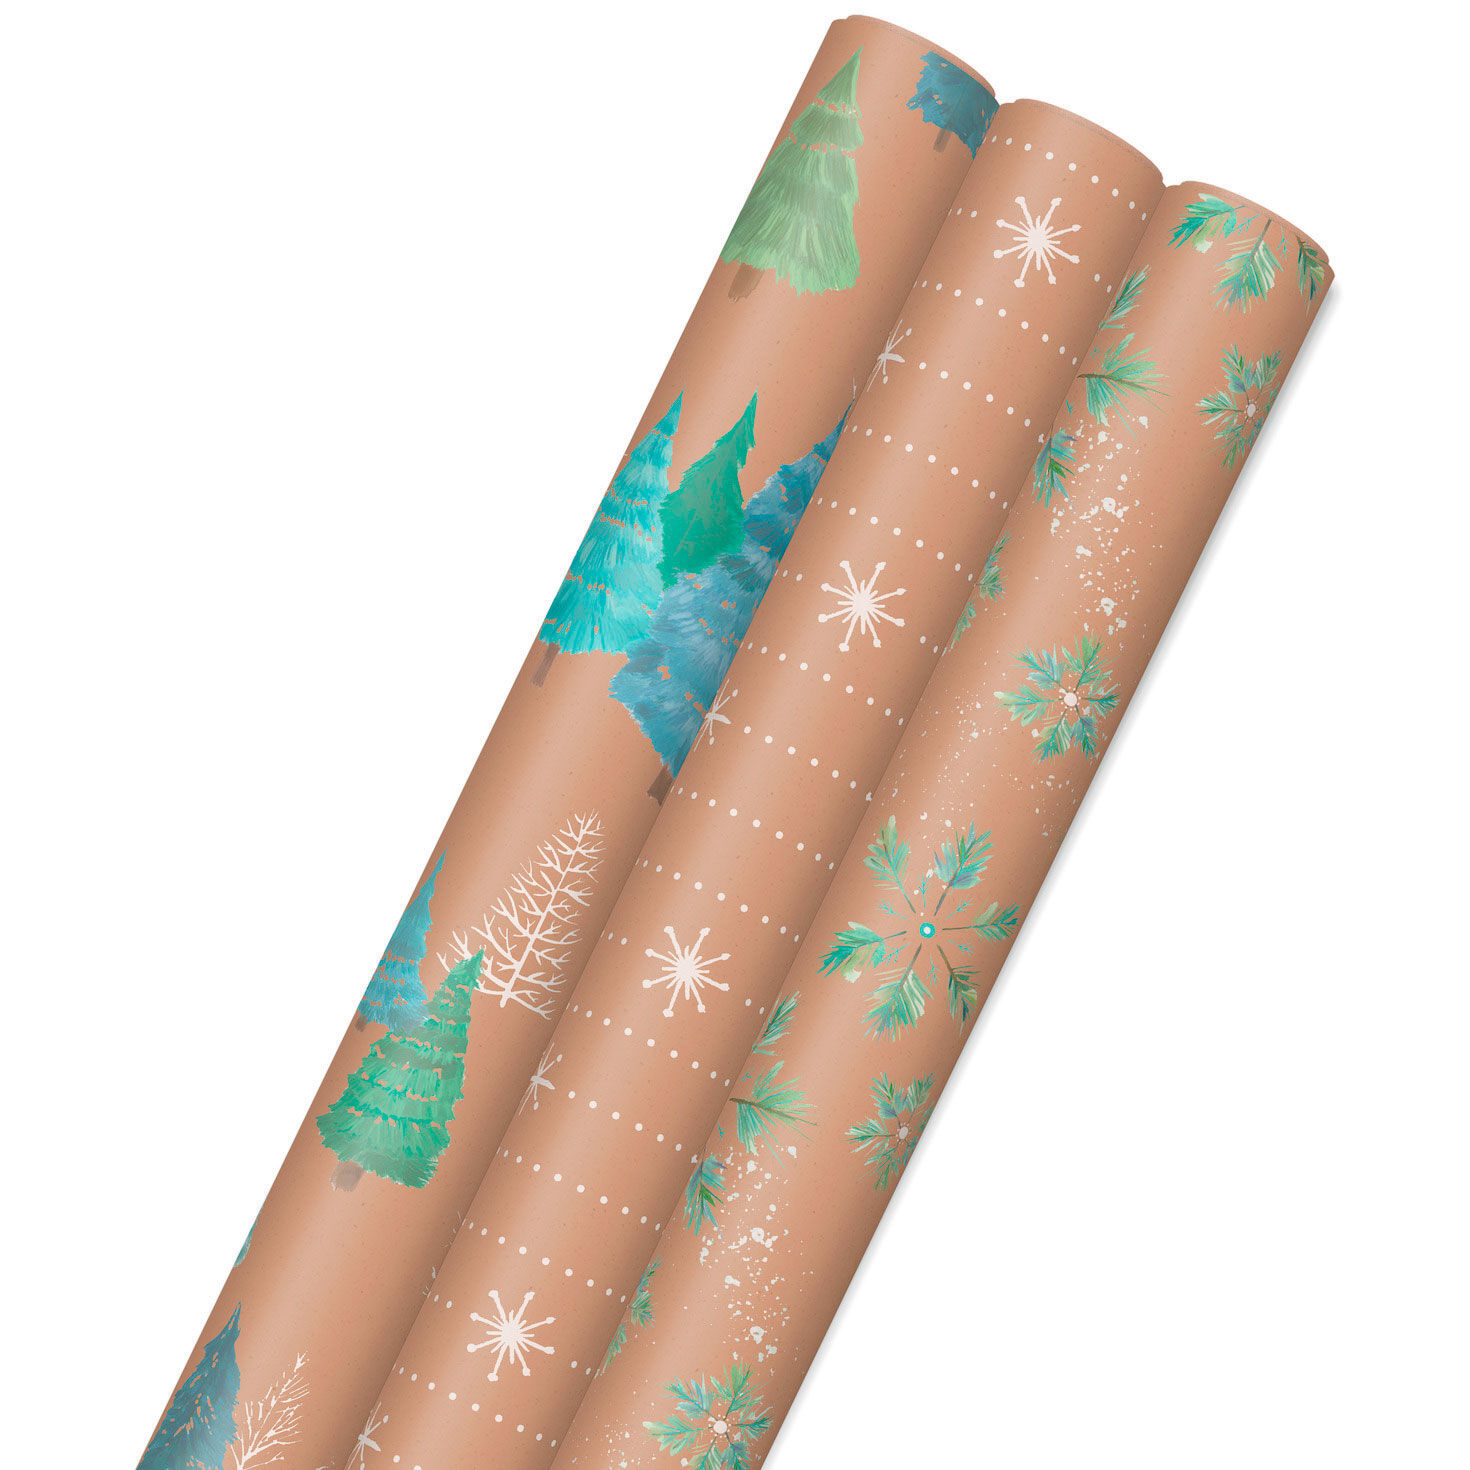 6 Rolls Christmas Wrapping Paper Christmas Gift Wrapping Papers Kraft Gift  Packing Paper Winter Birthday Holiday Christmas Gift Paper Christmas Theme